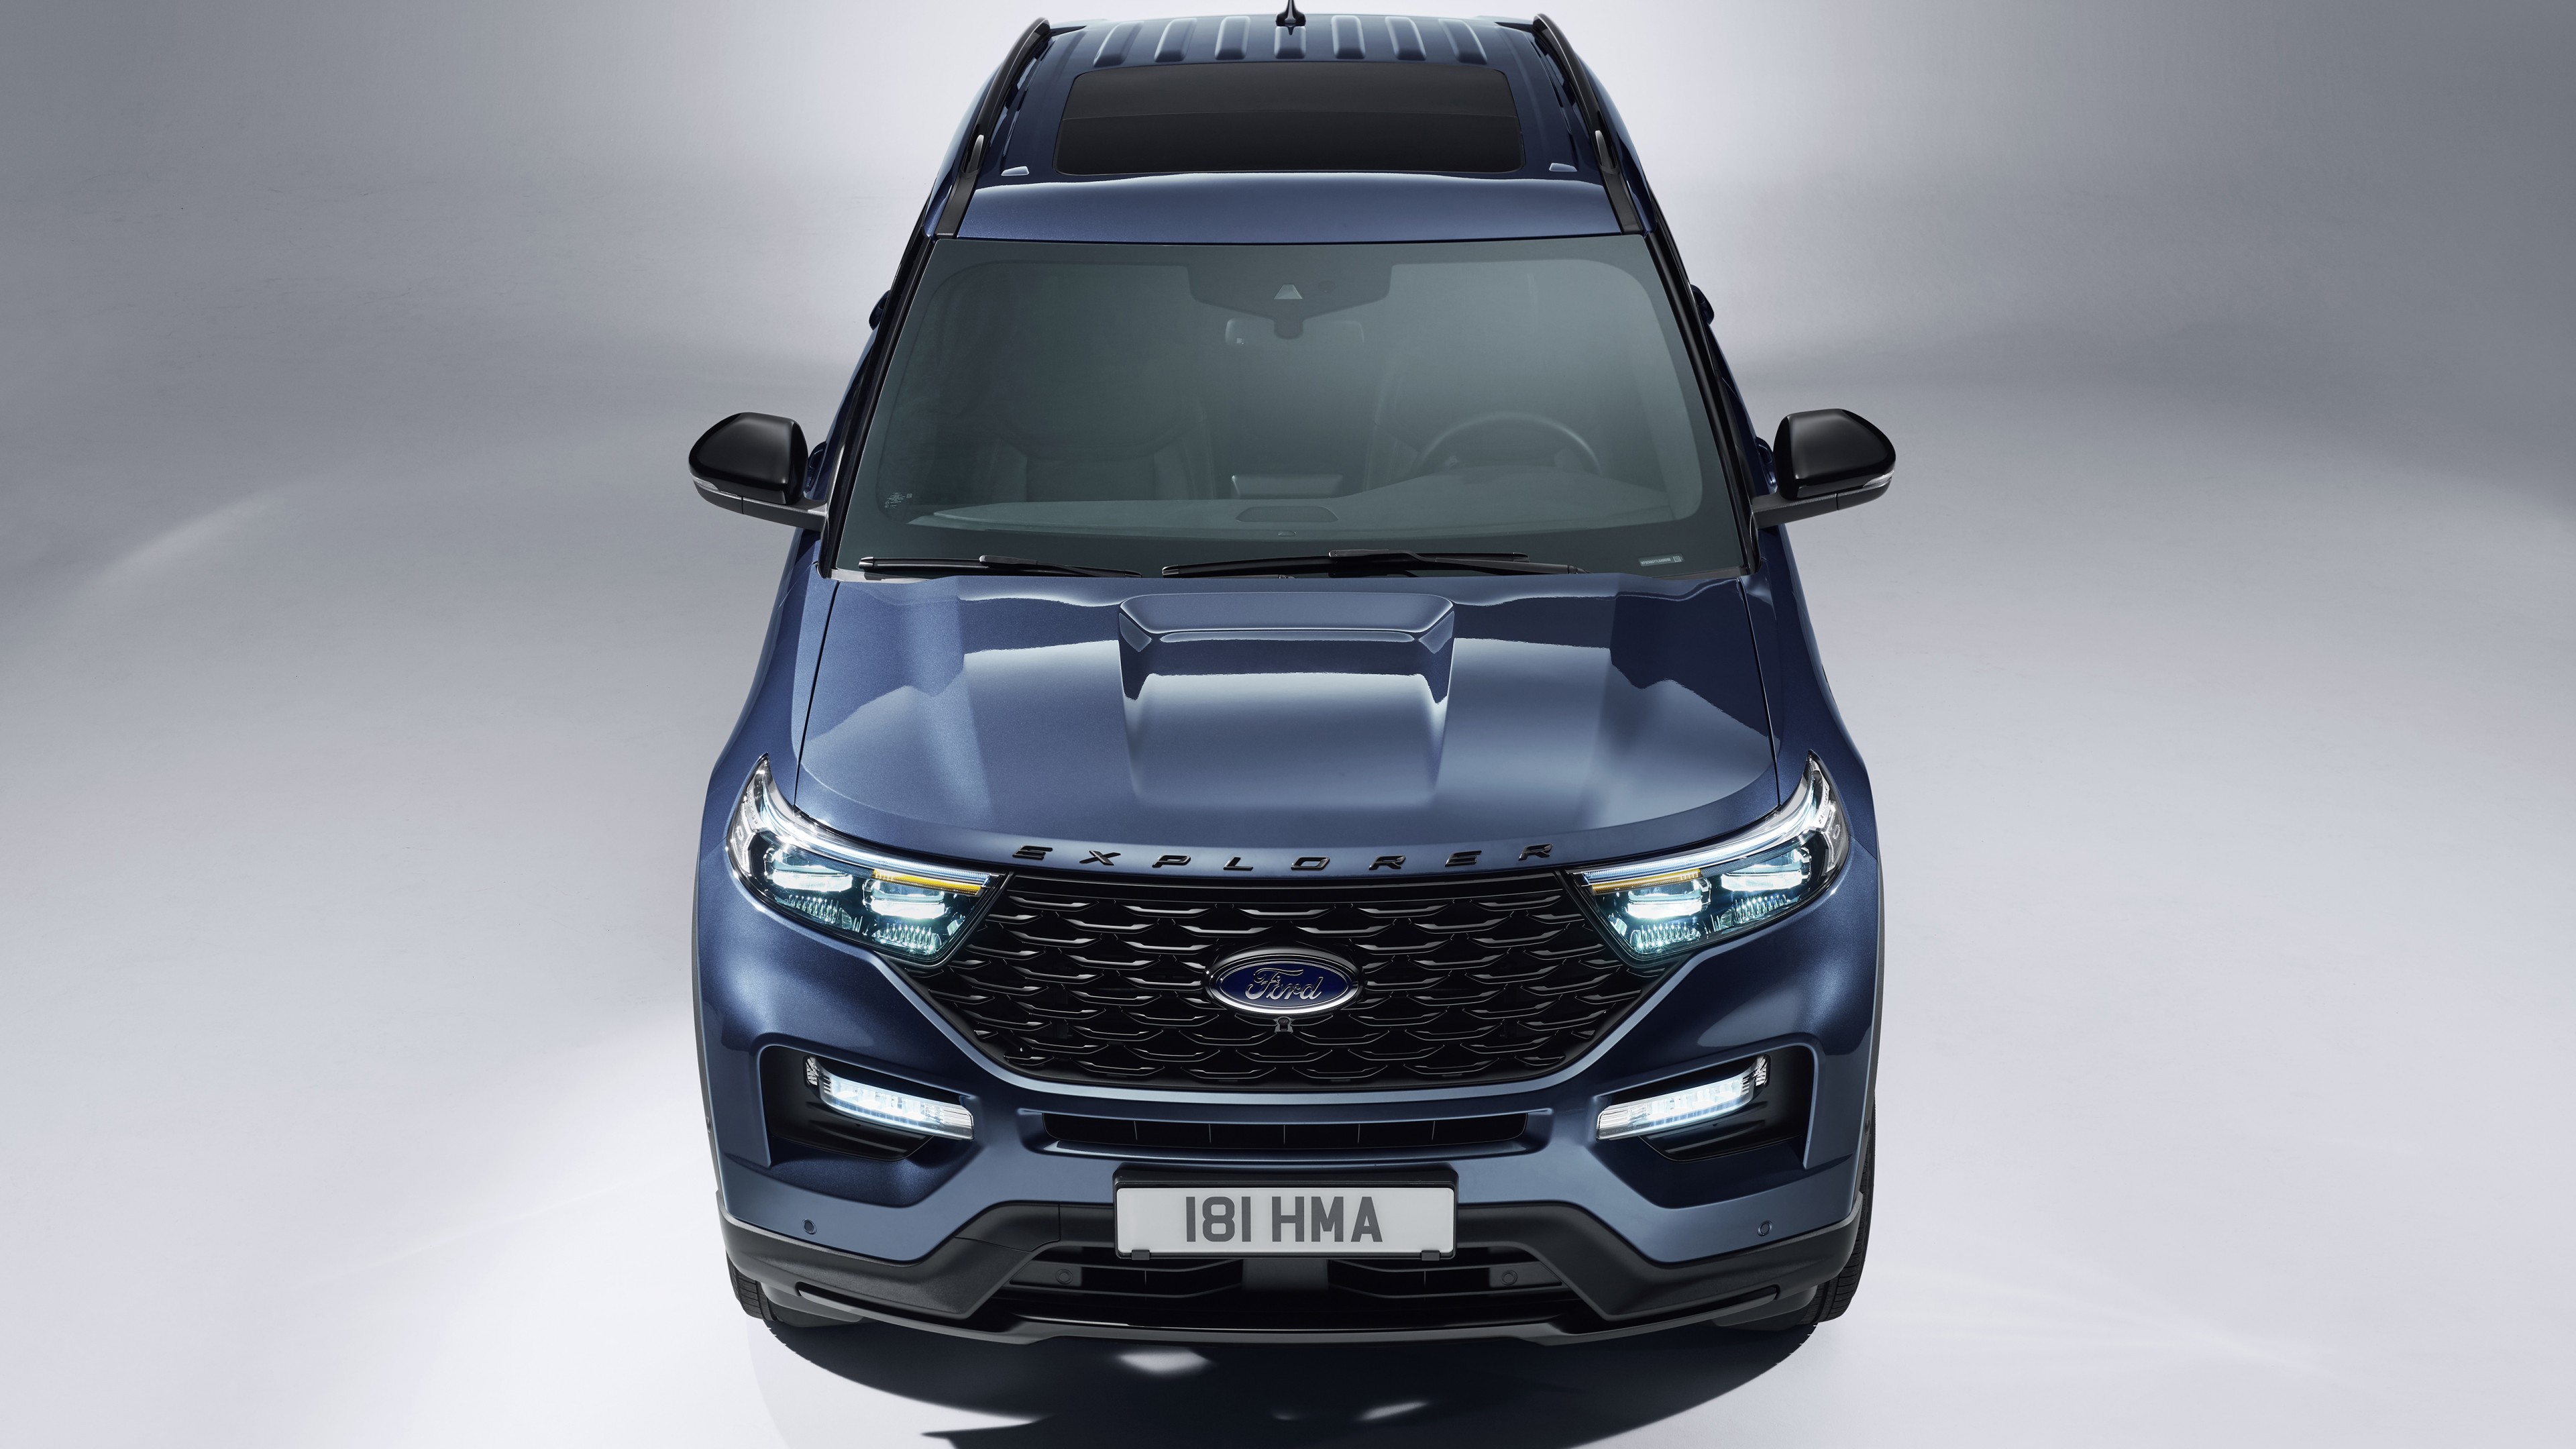 Ford Explorer hd restyling